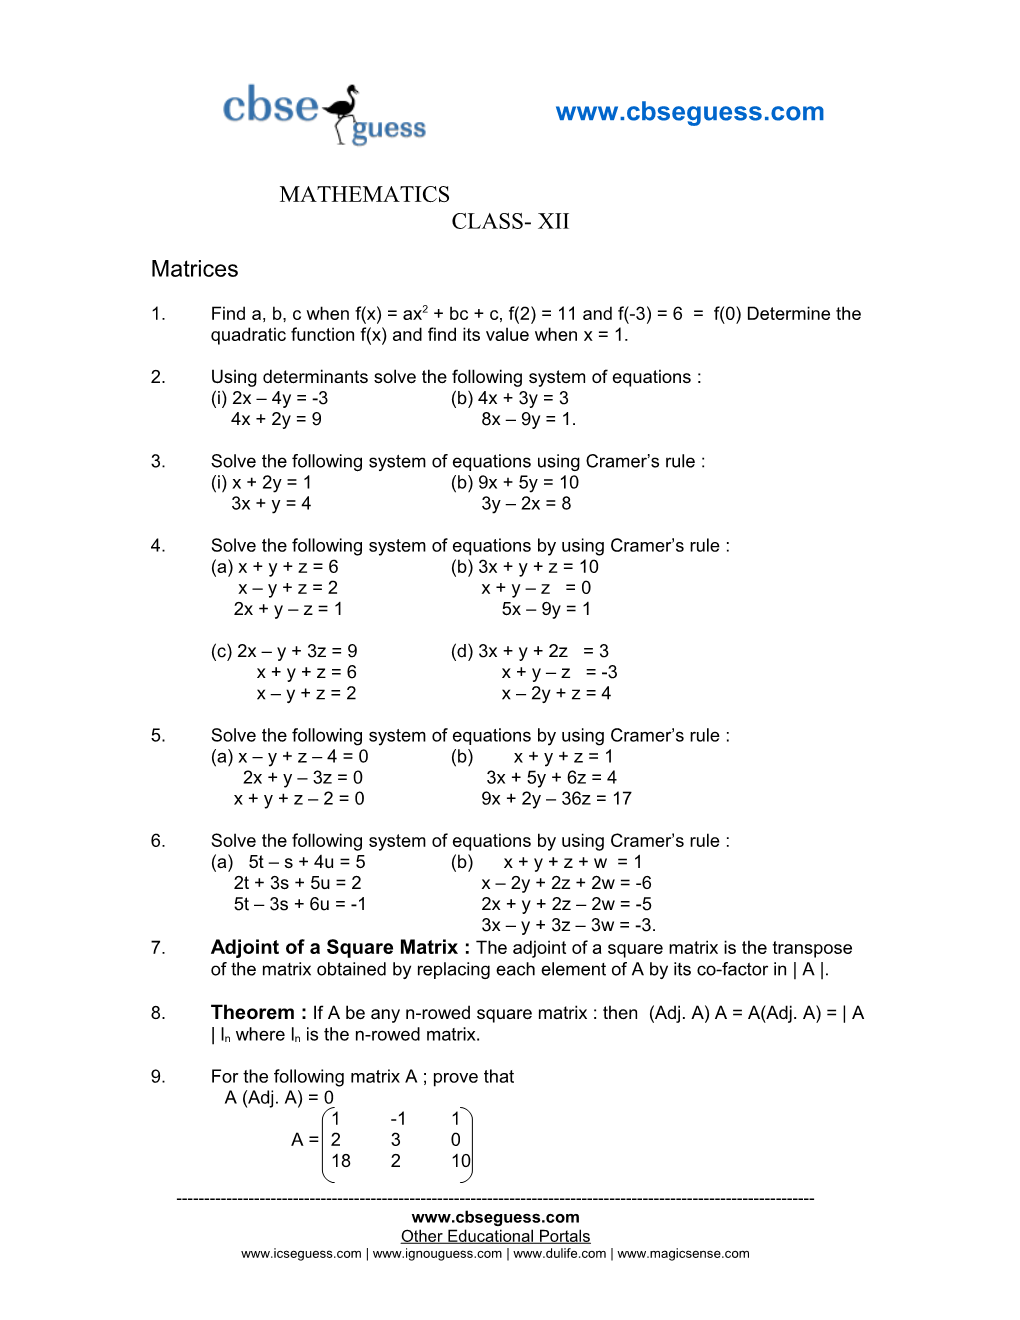 2. Using Determinants Solve the Following System of Equations